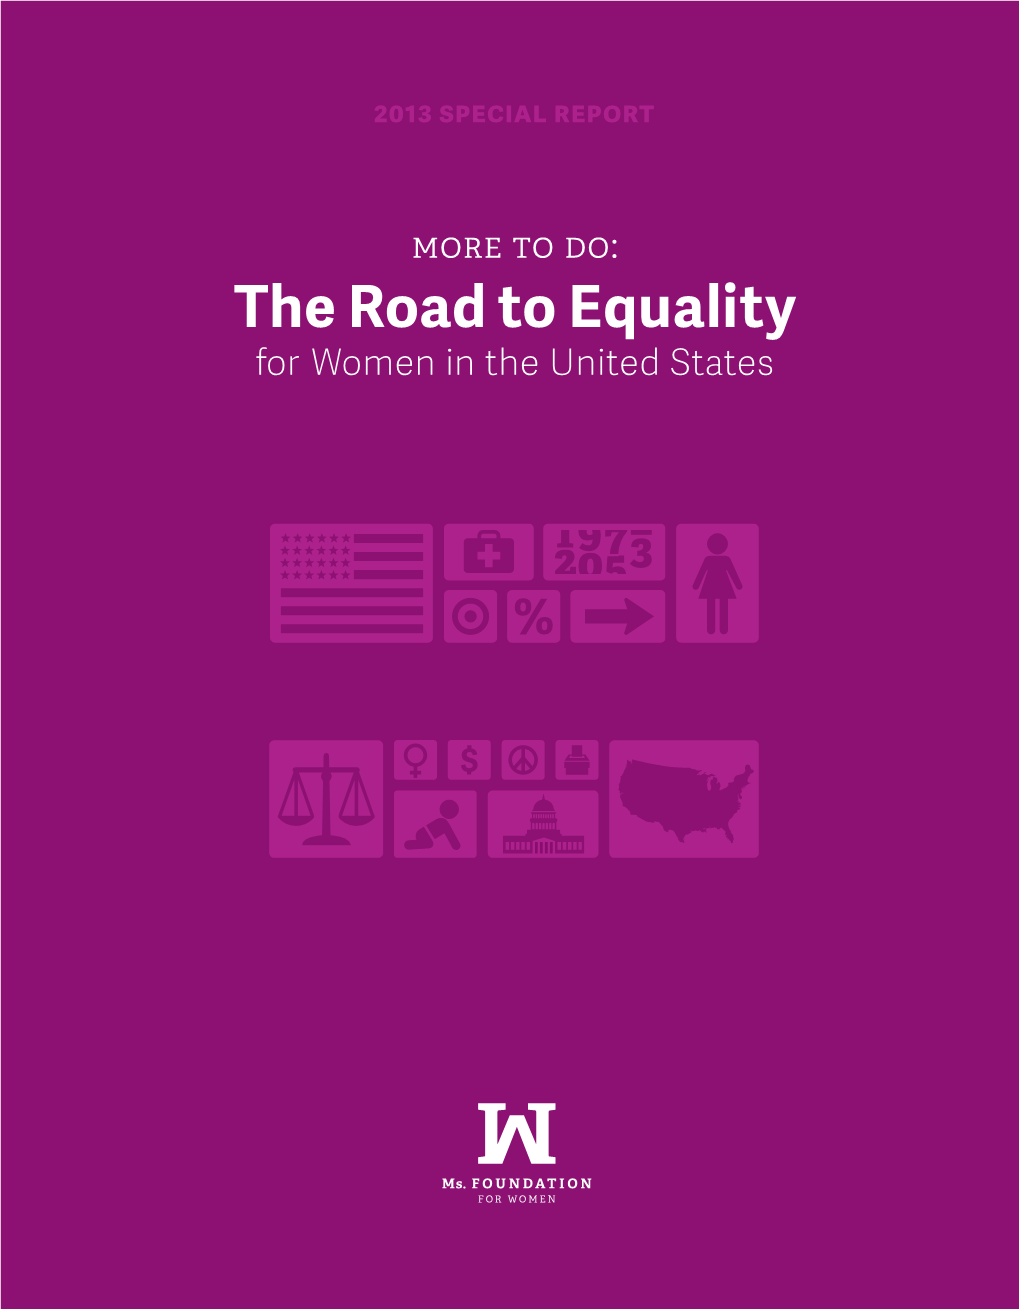 The Road to Equality for Women in the United States